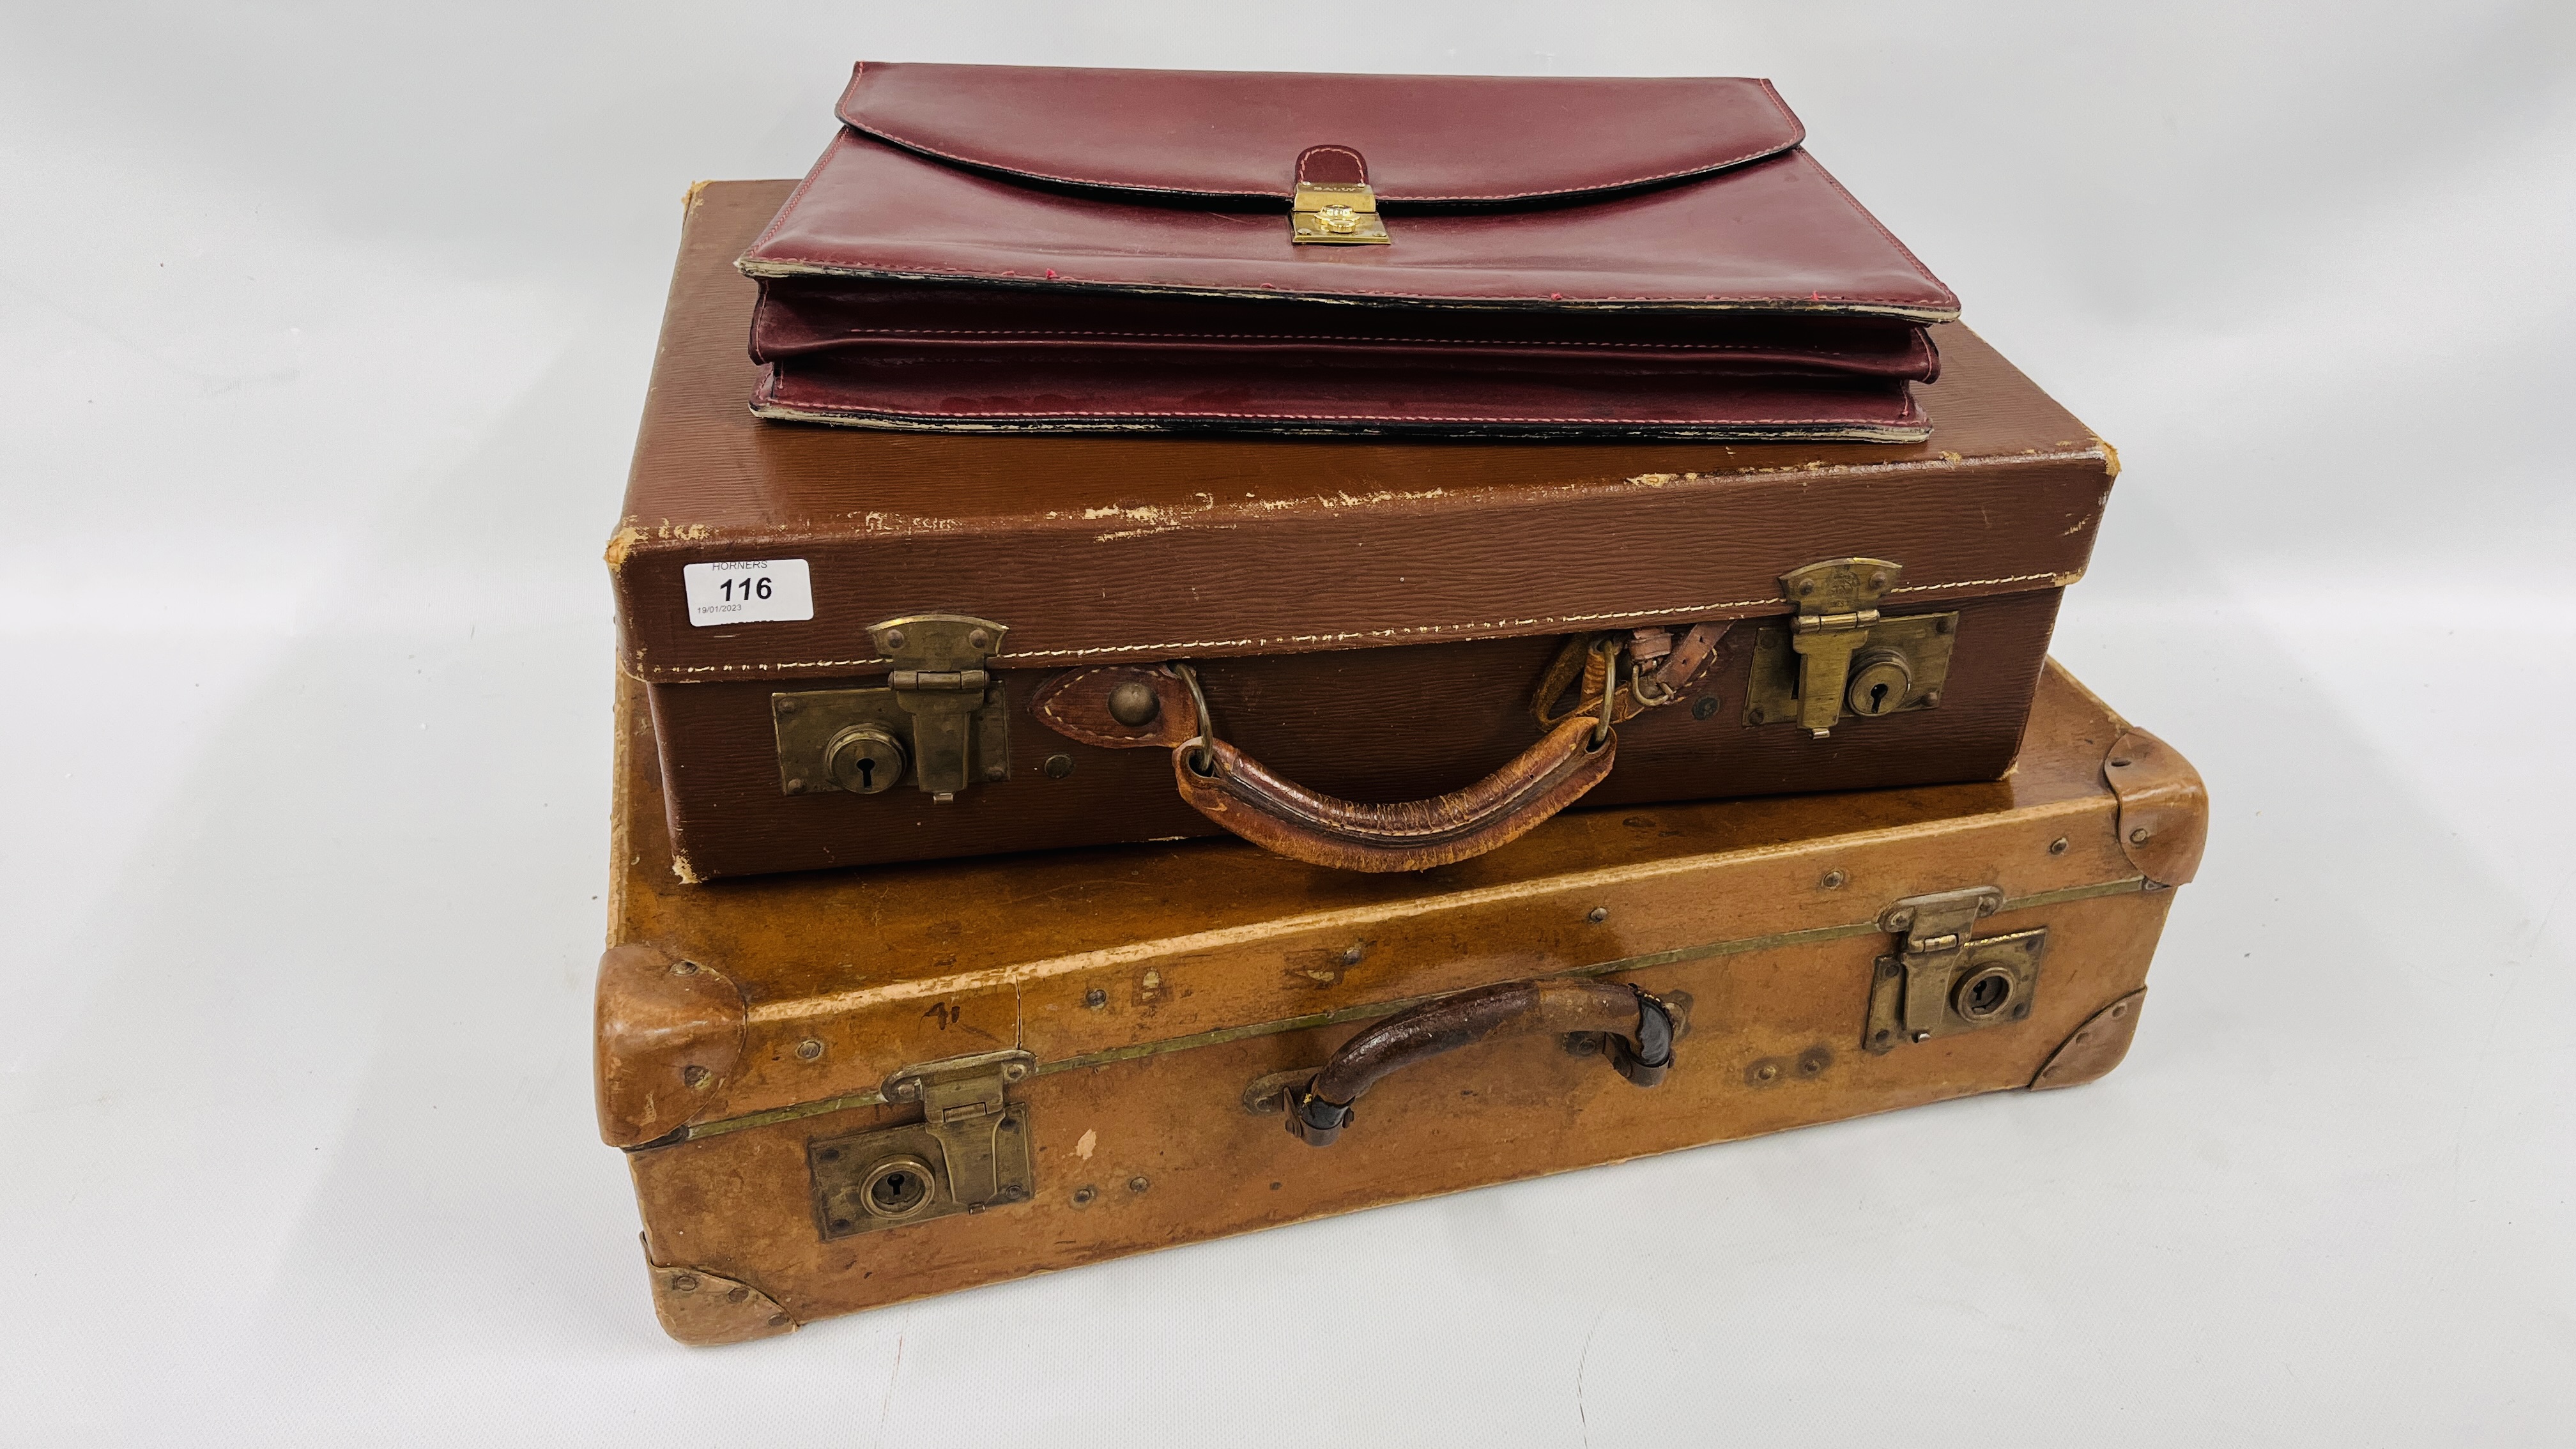 TWO VINTAGE LUGGAGE CASES ALONG WITH A LEATHER DOCUMENT CASE MARKED "BALLY"